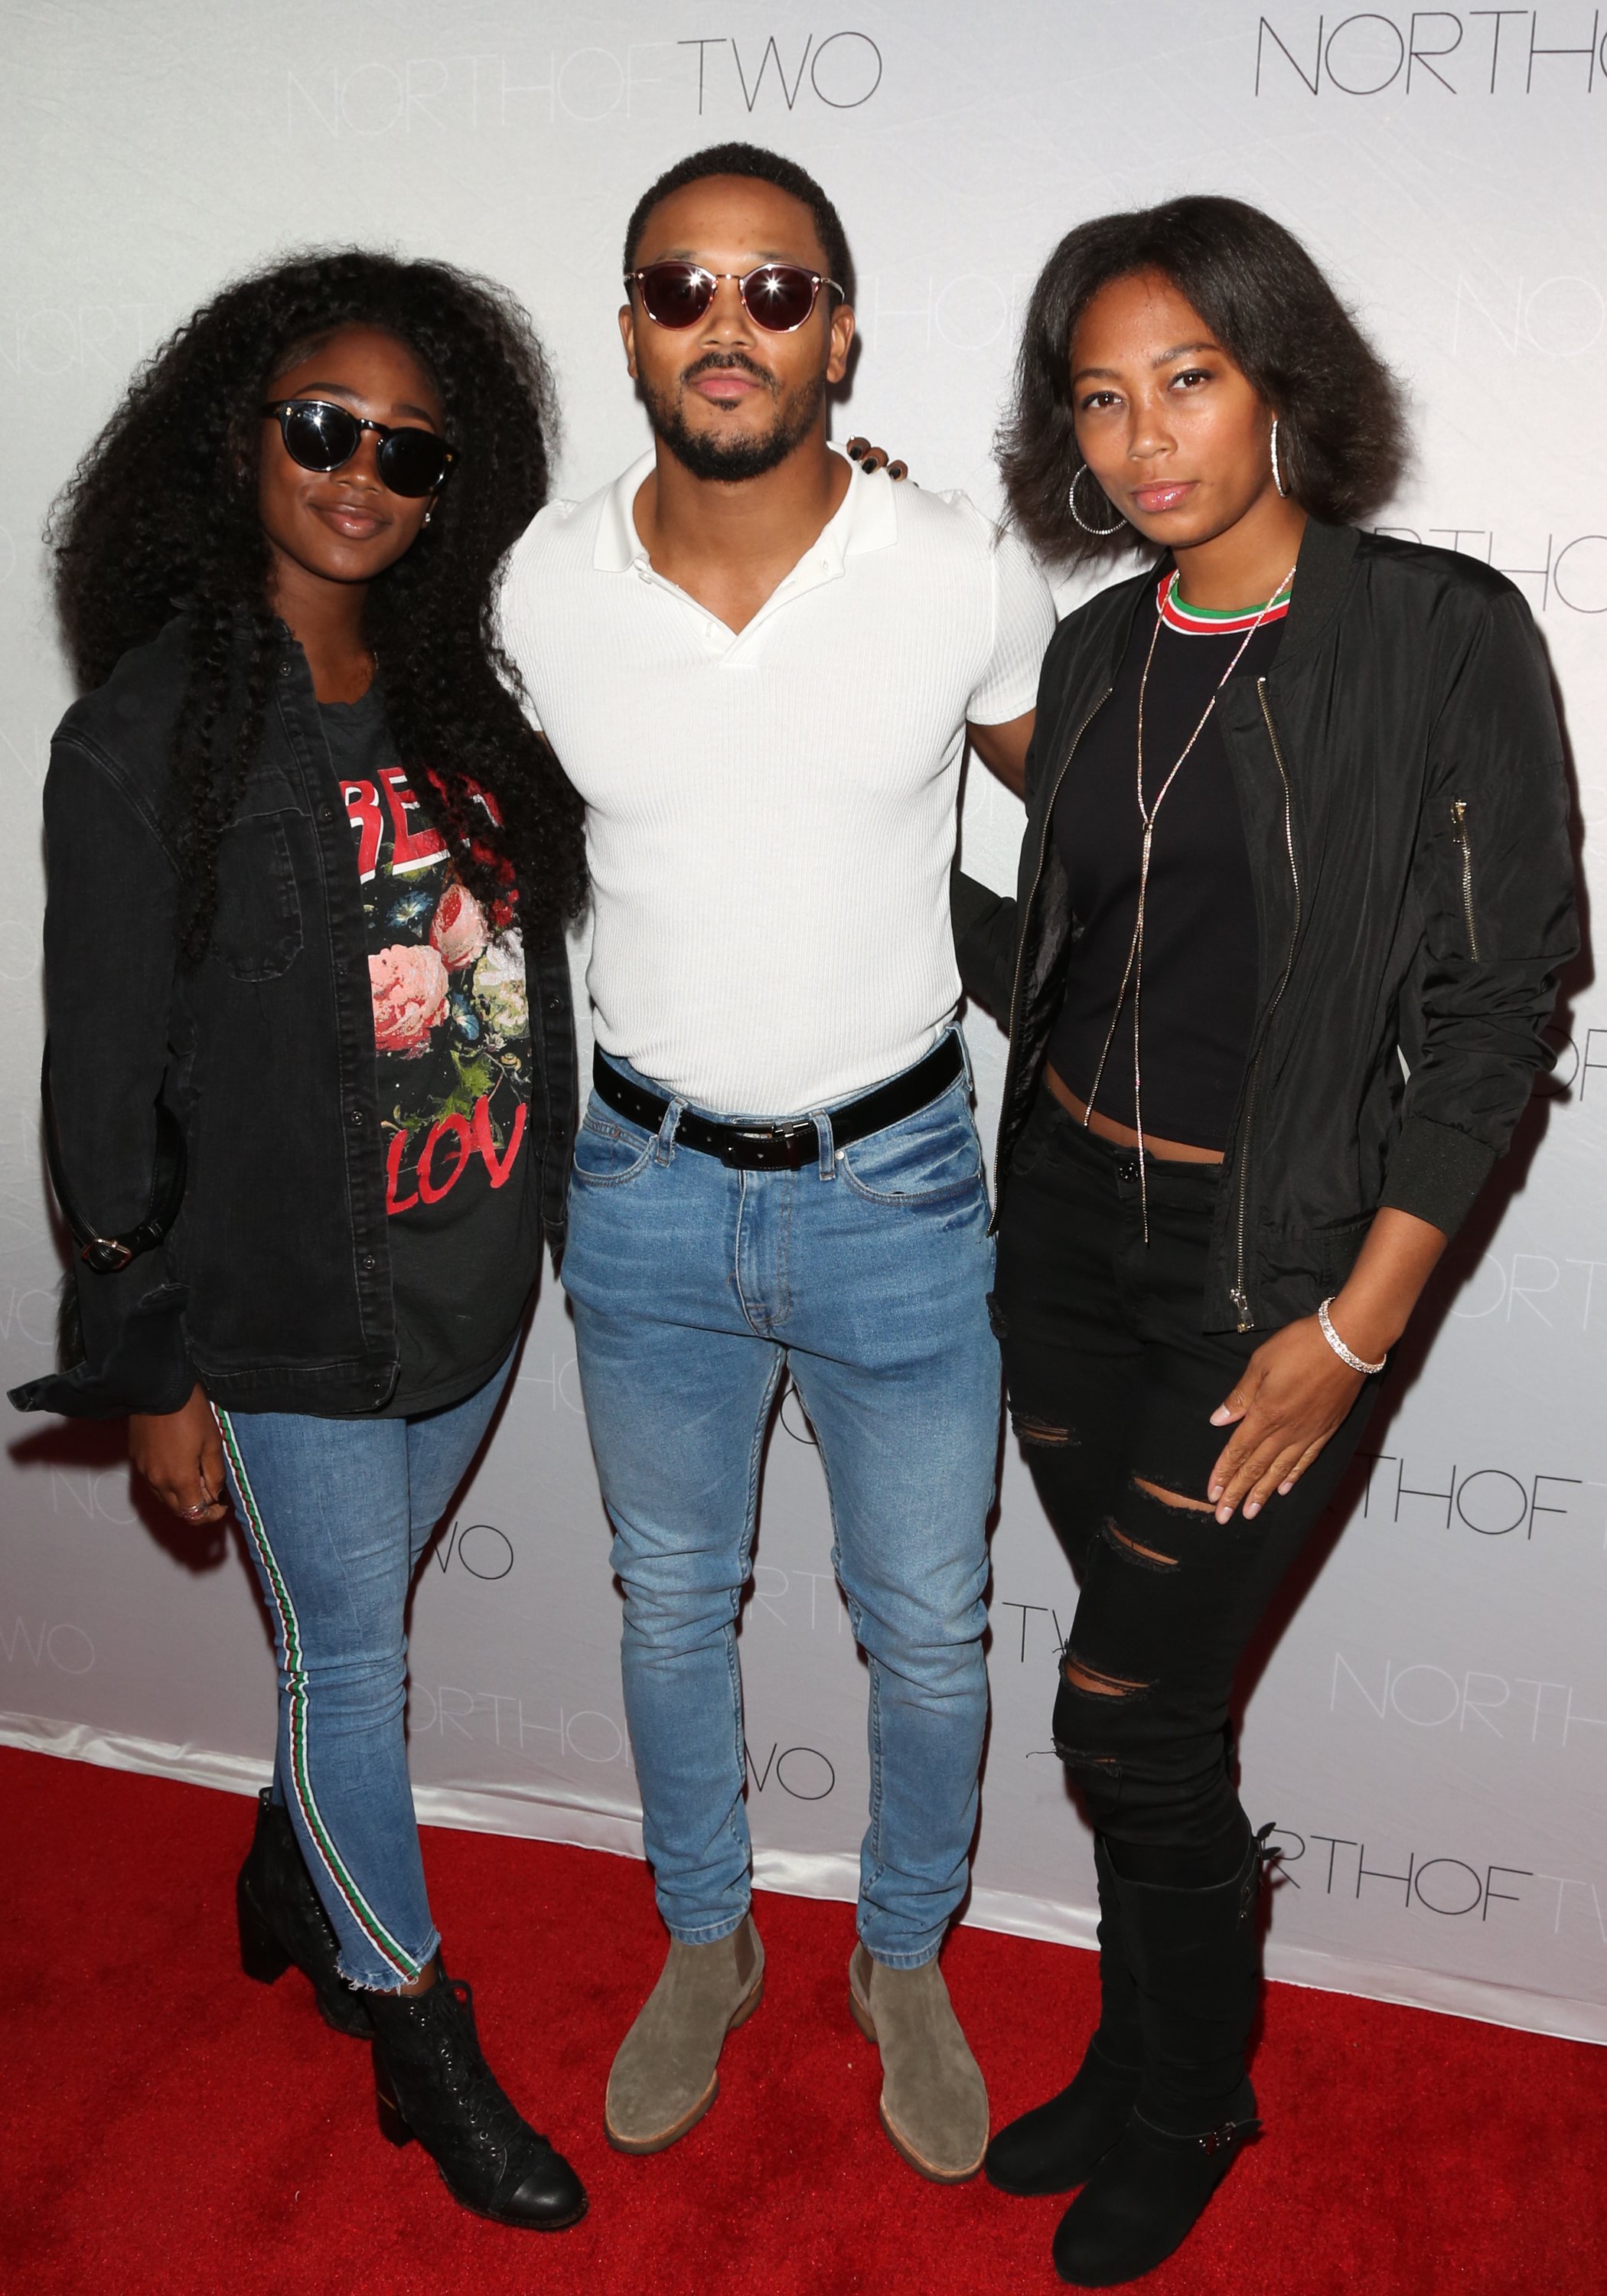 Actor Romeo Miller (C) with his sisters Itali Miller (L) and Inty Miller (R) at the premiere of "Adolescence" at Laemmle Monica Film Center on May 24, 2018, in Santa Monica, California. | Source: Getty Images 